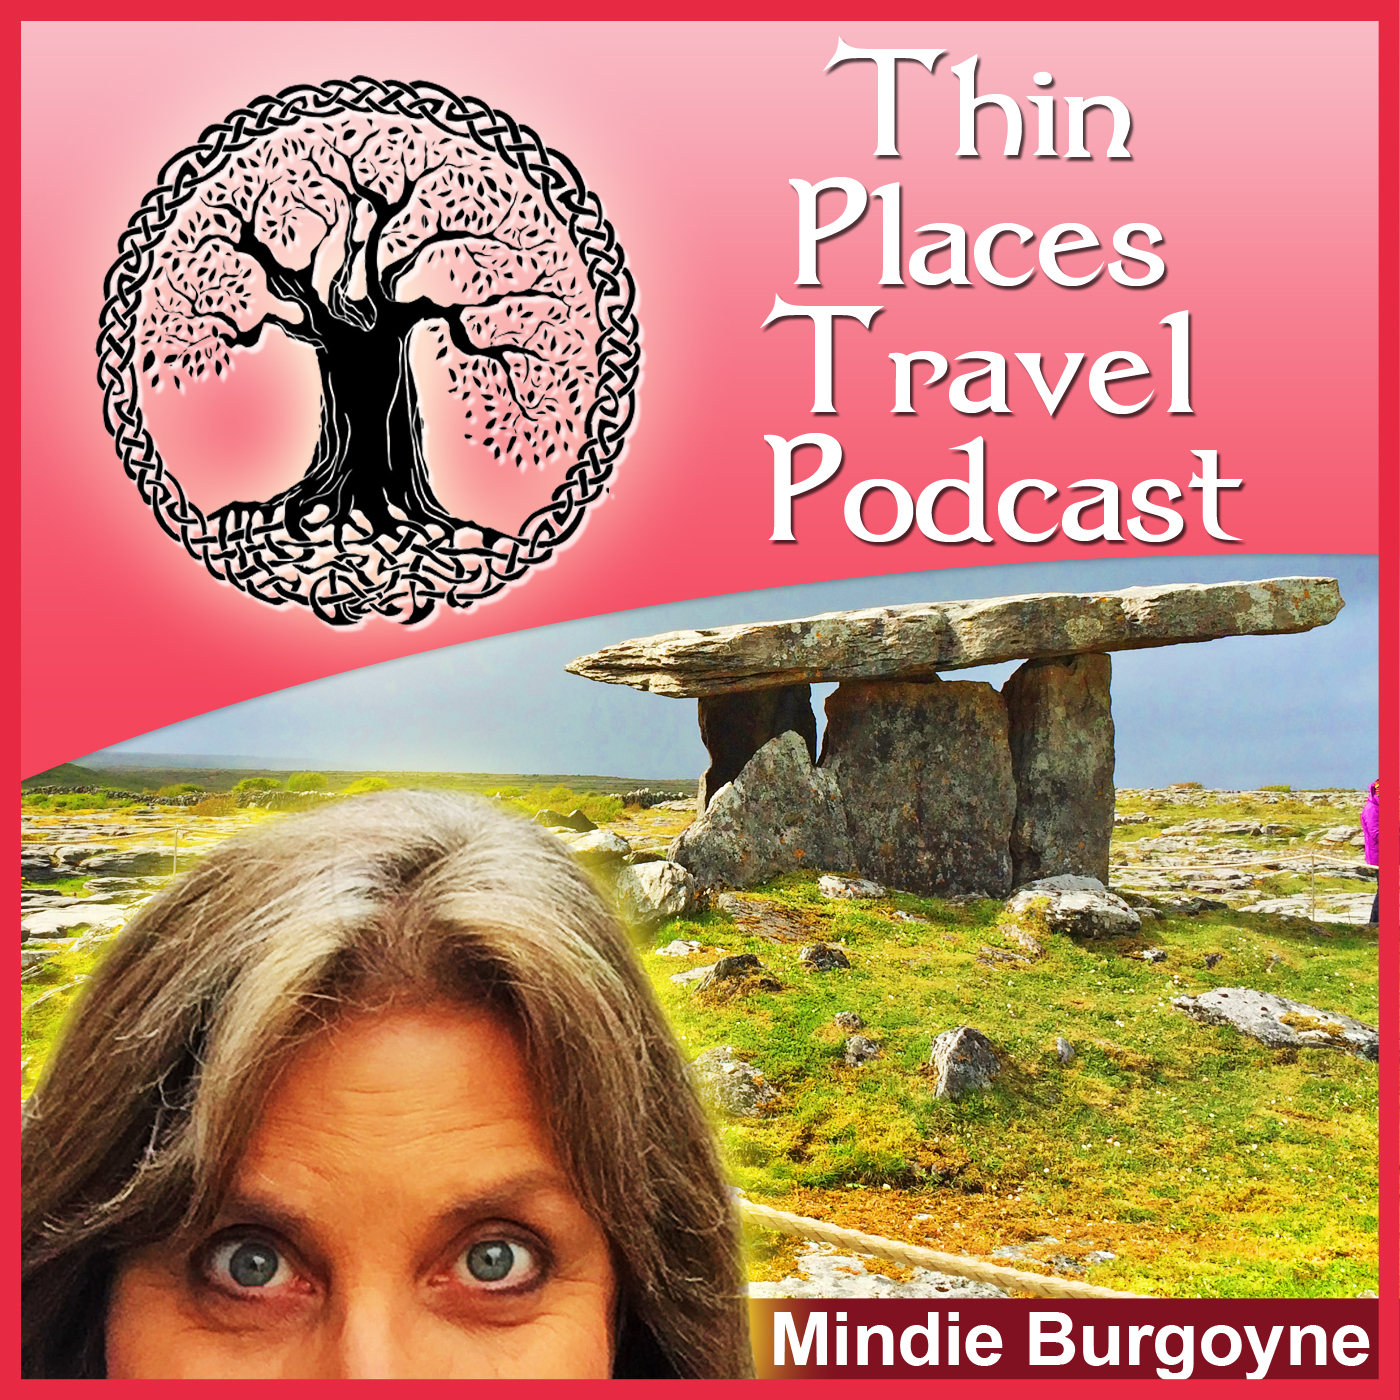 Thin Places Podcast